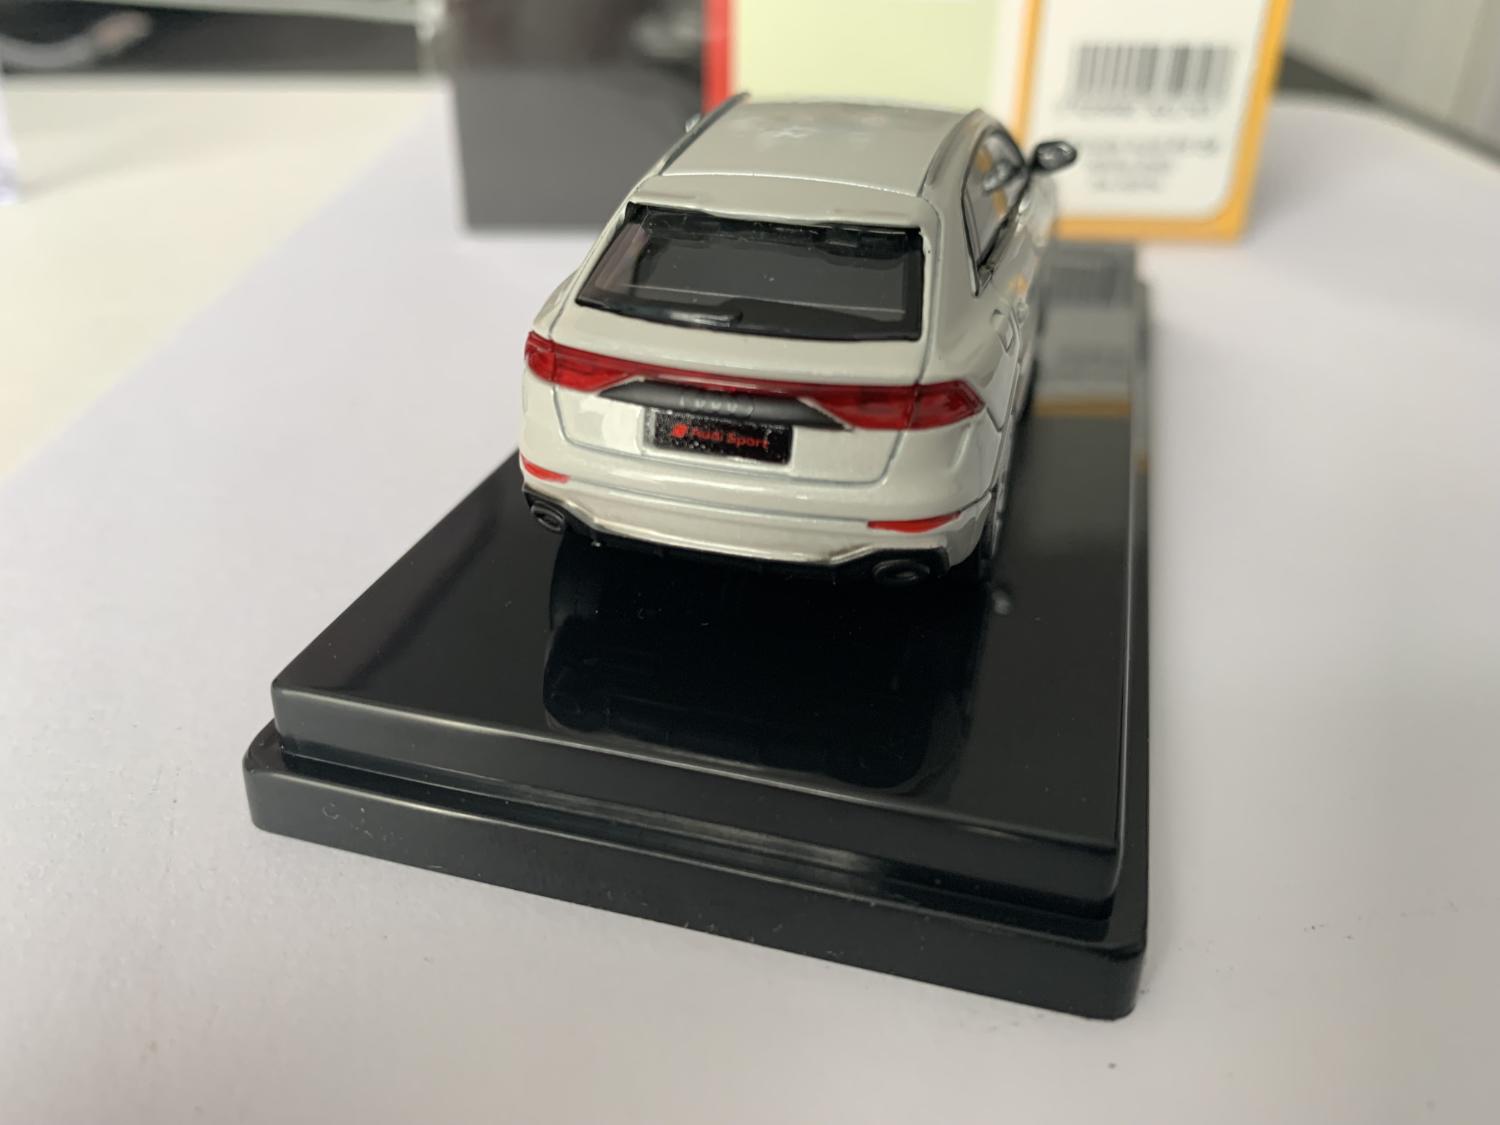 n excellent scale model of an Audi RS Q8 decorated in white with roof top spoiler, roof rails and silver wheels.